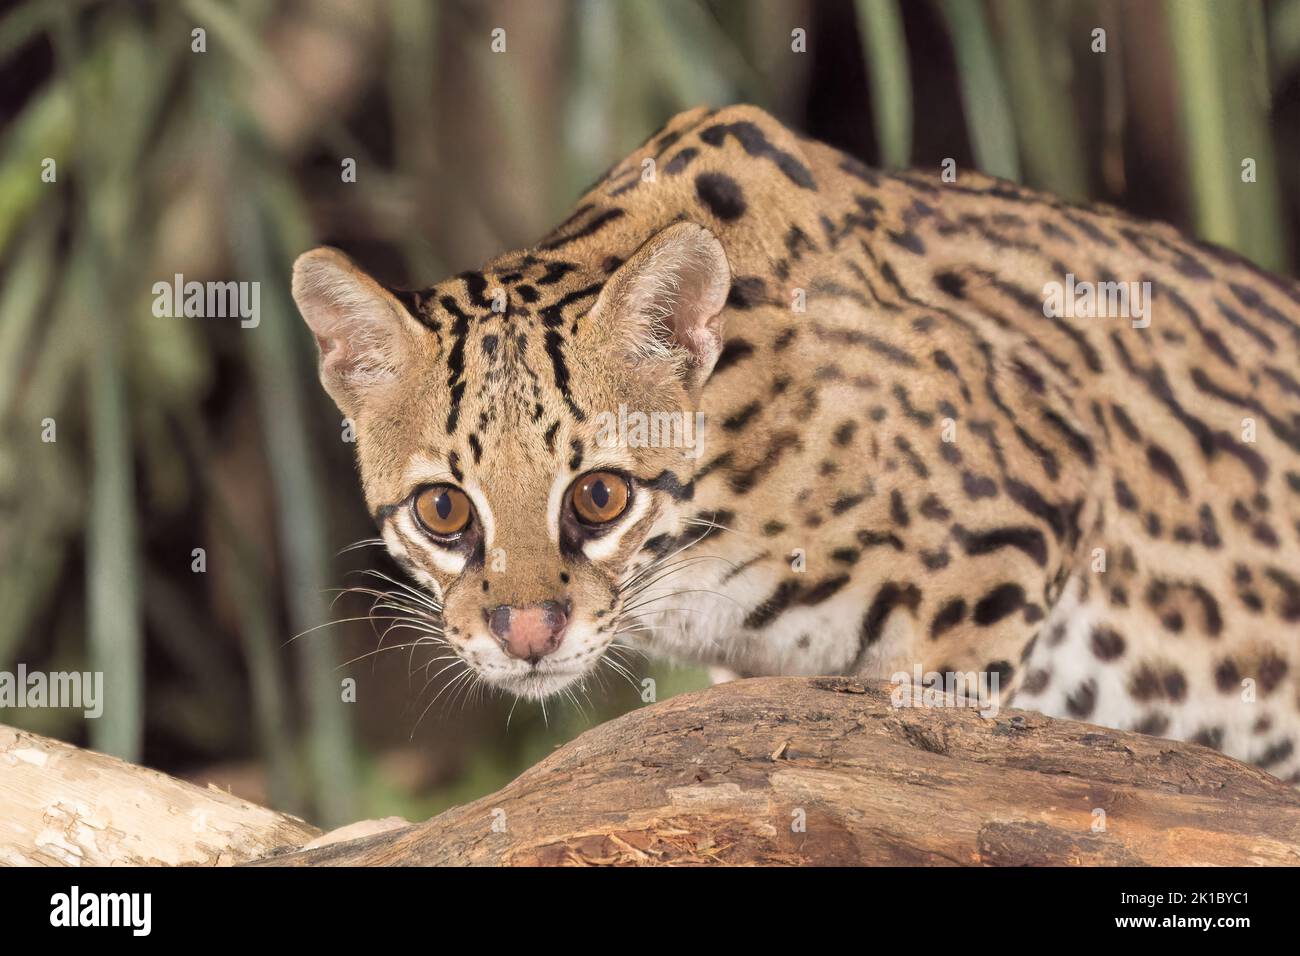 ocelot, Leopardus pardalis, close up of head of single adult hunting at night in the Pantanal, Brazil Stock Photo